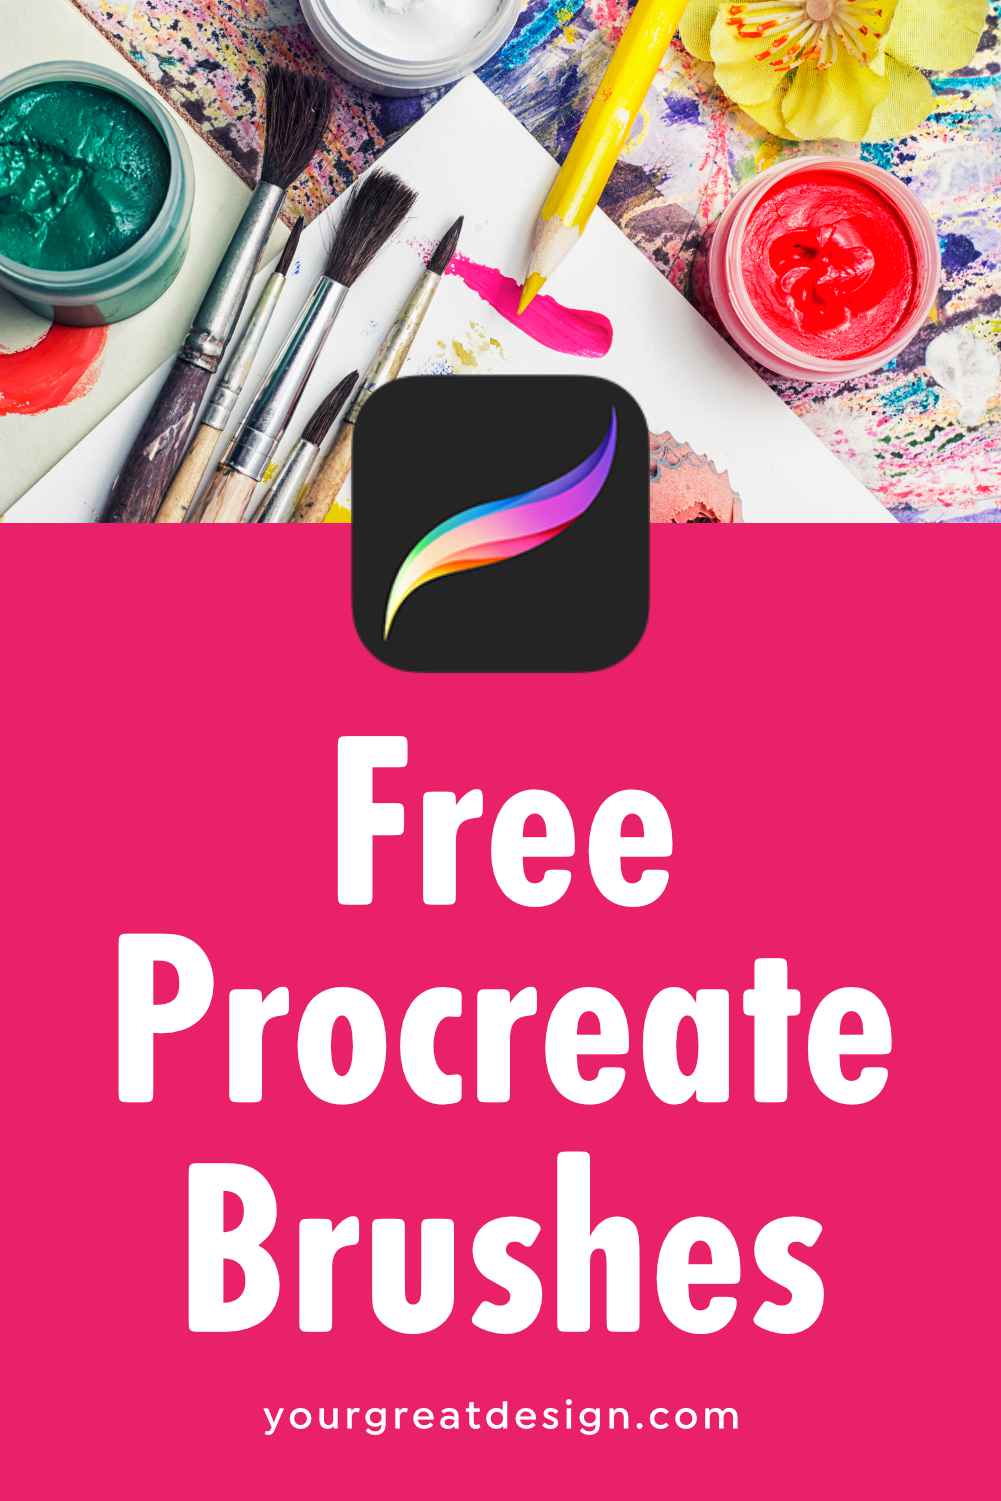 where to download free procreate brushes